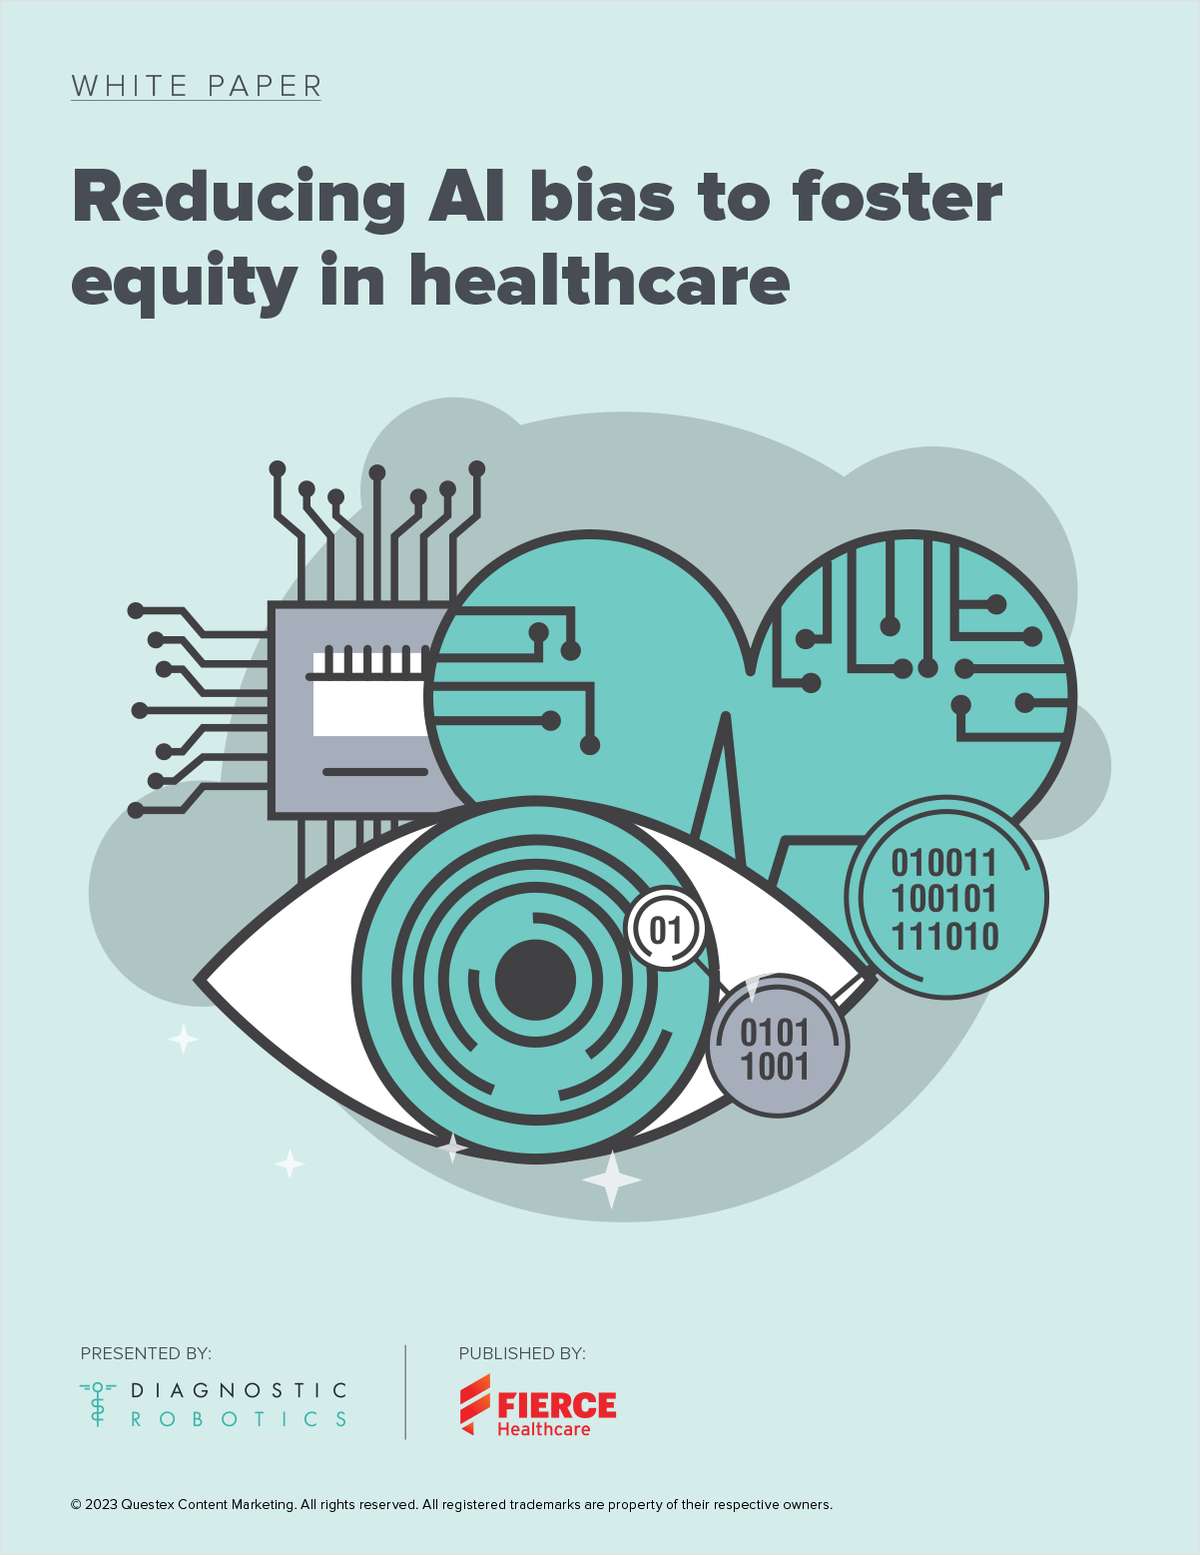 Leveraging Data Analytics to Foster Equity in Healthcare